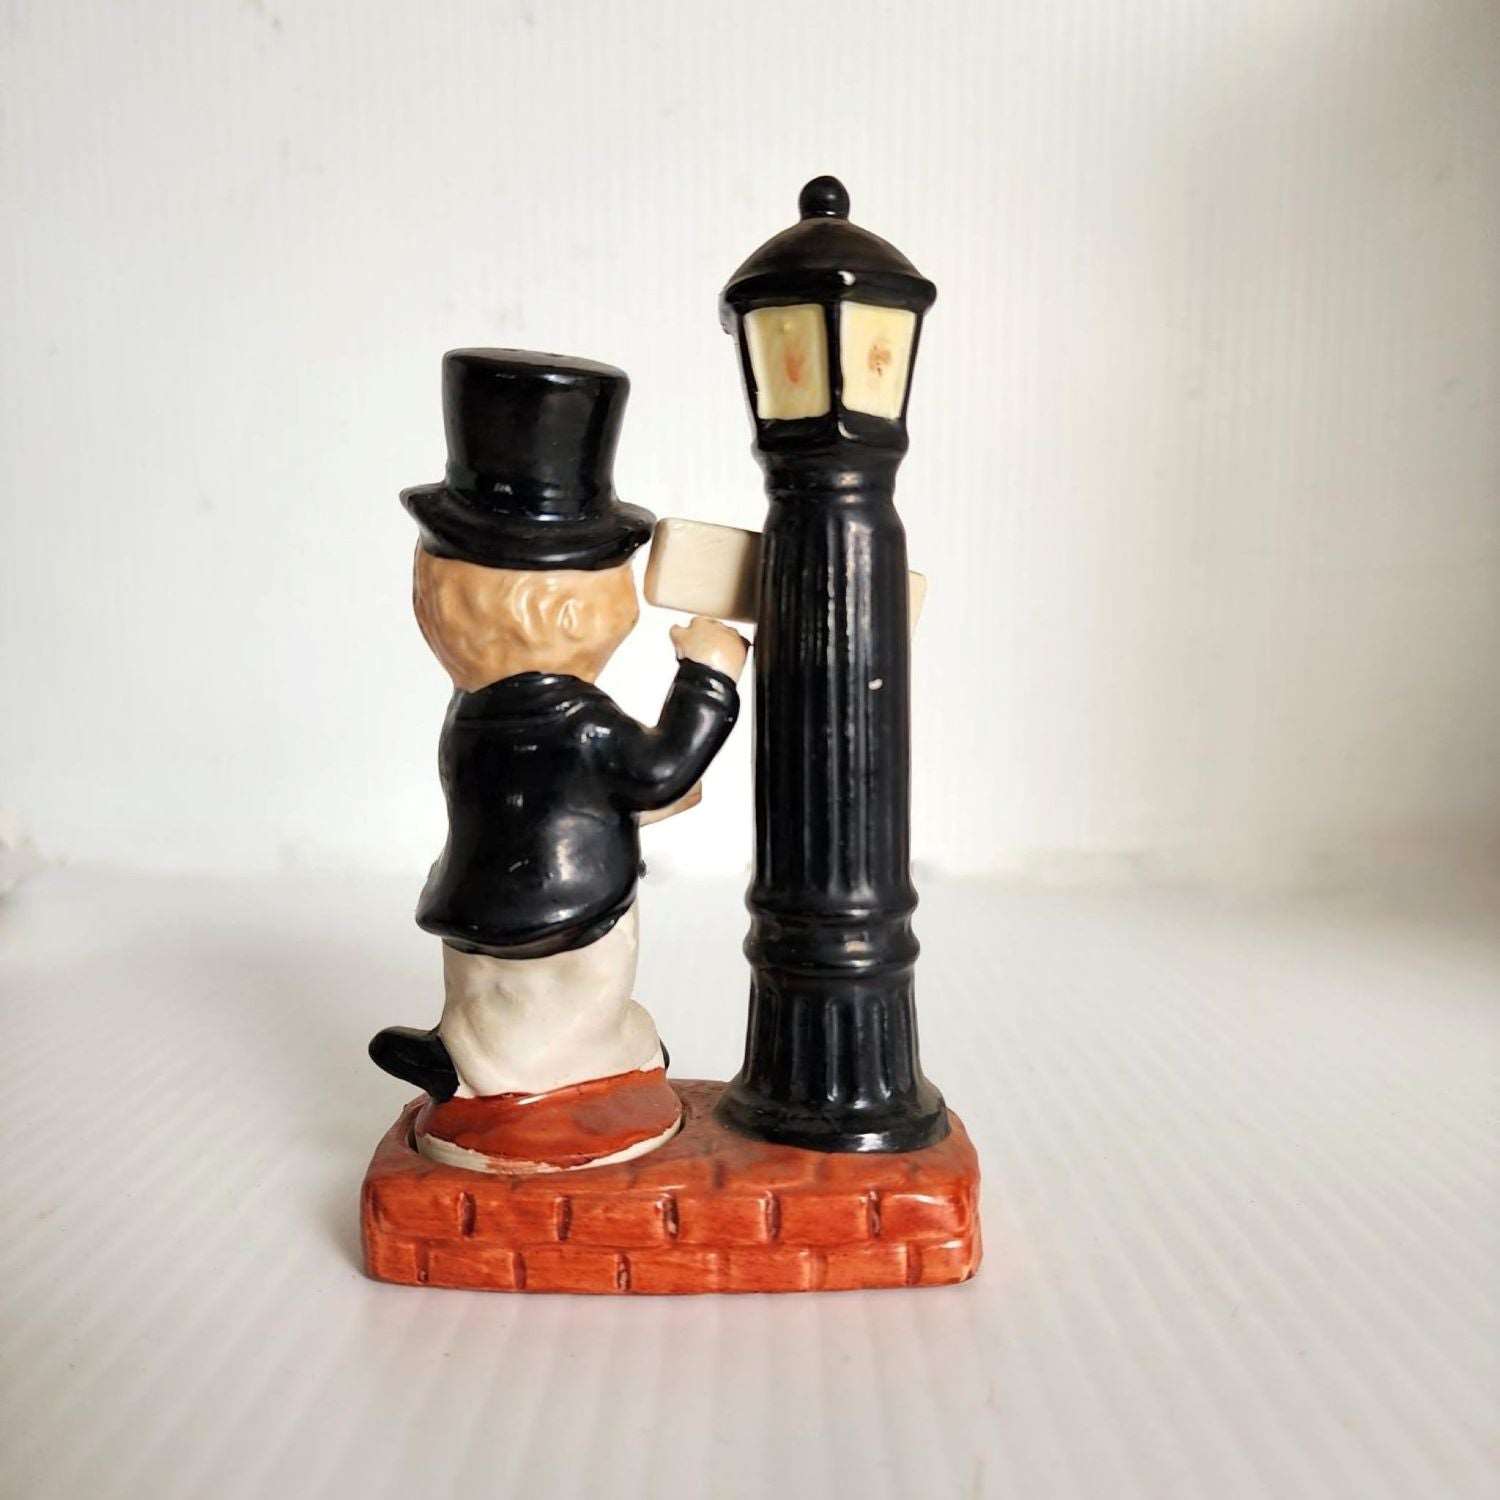 Say When Boy and Lamp Post Vintage Salt and Pepper Shaker Set